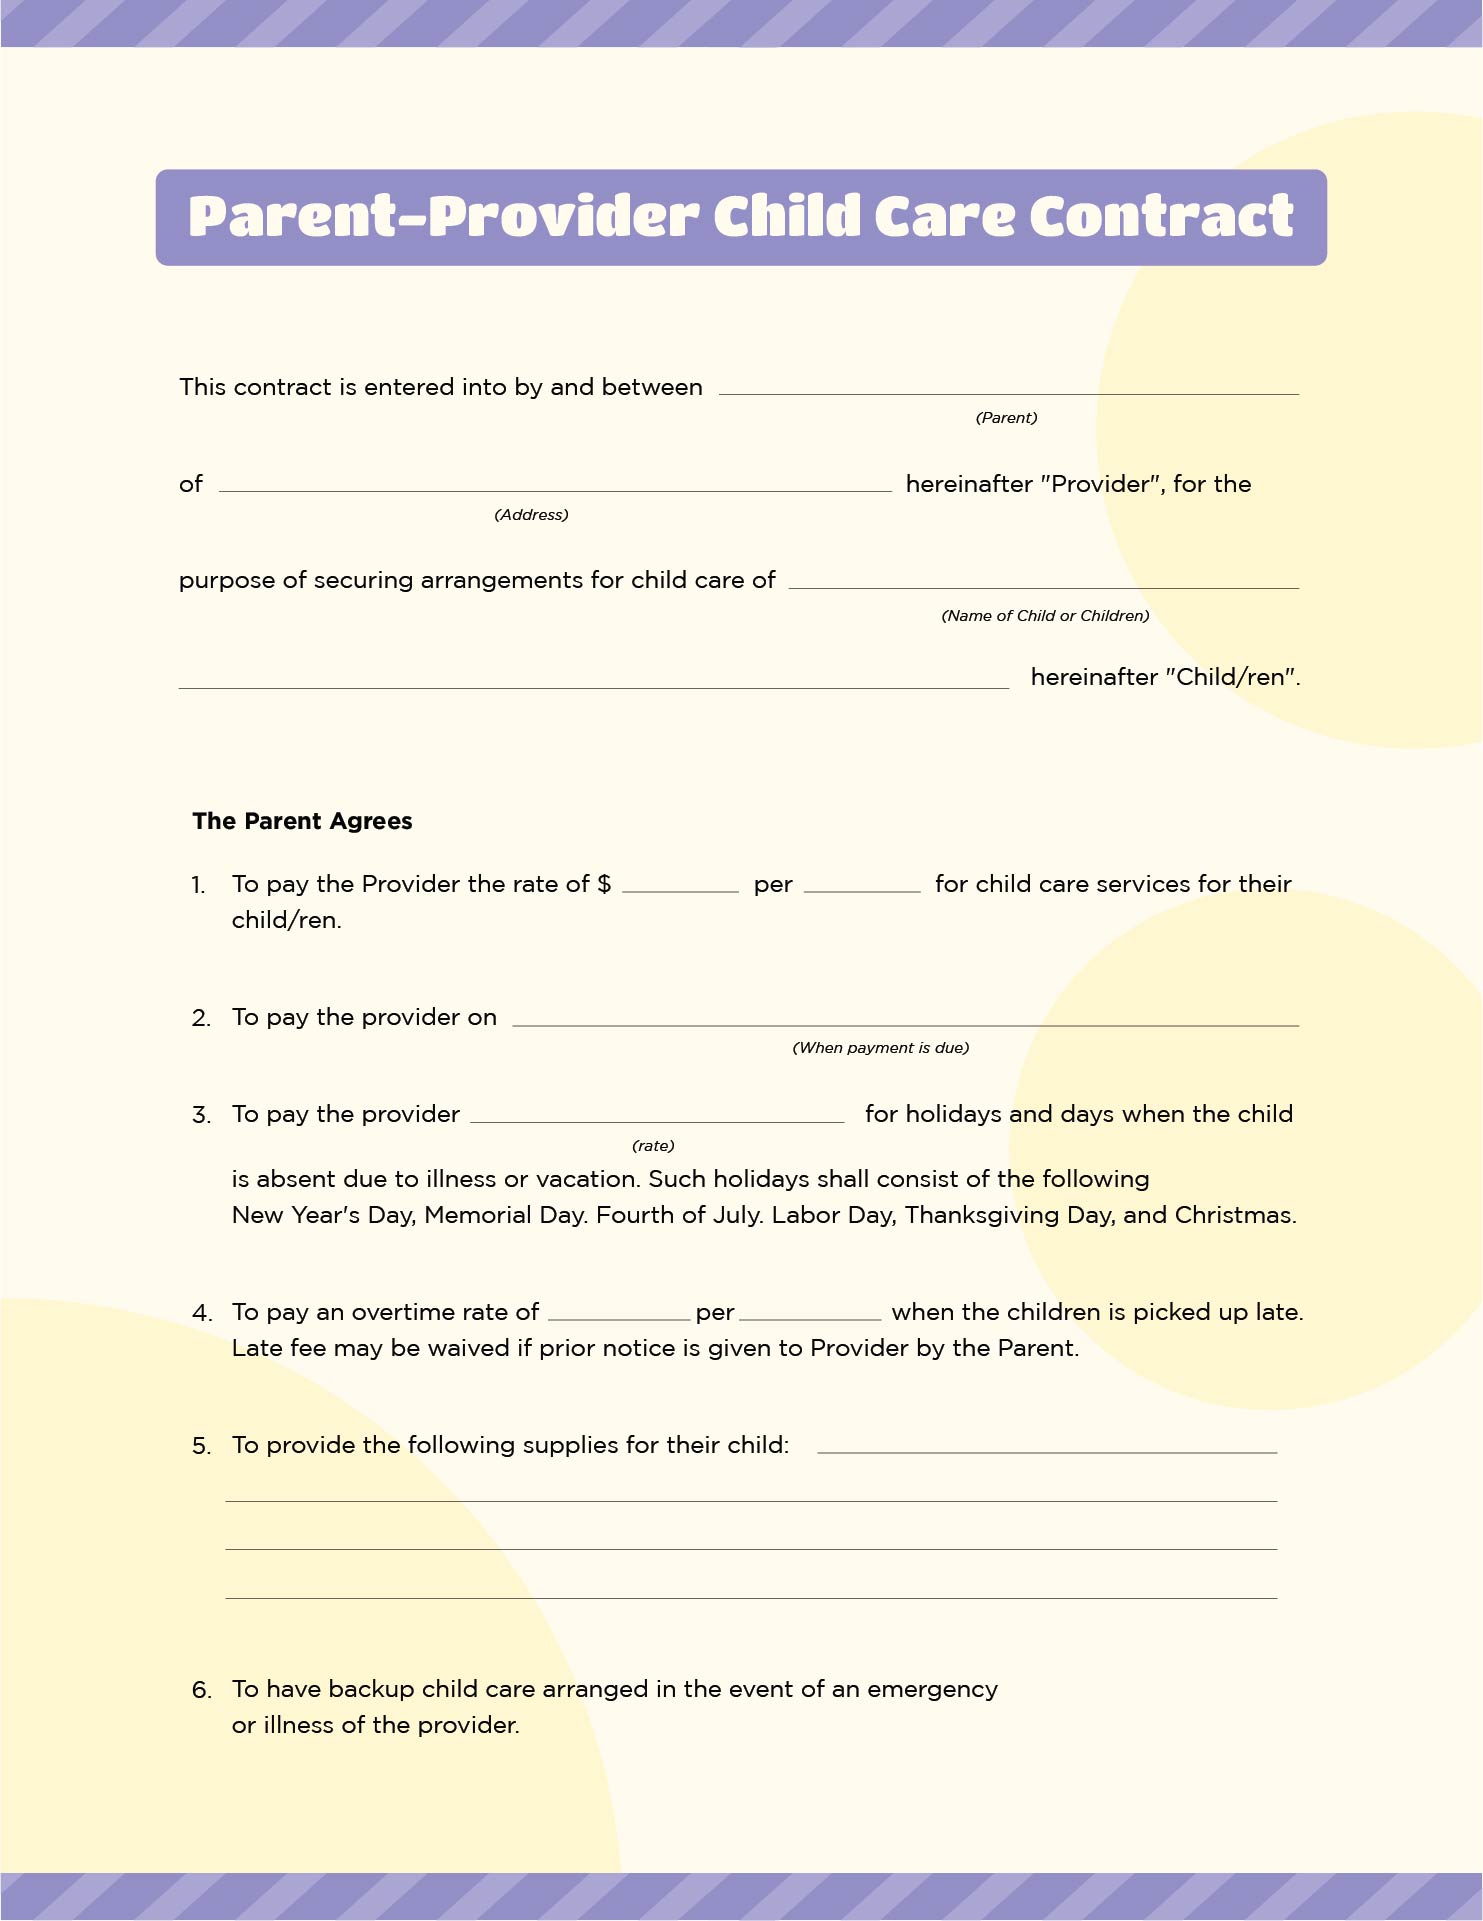 8-best-images-of-home-day-care-forms-printable-free-daycare-contract